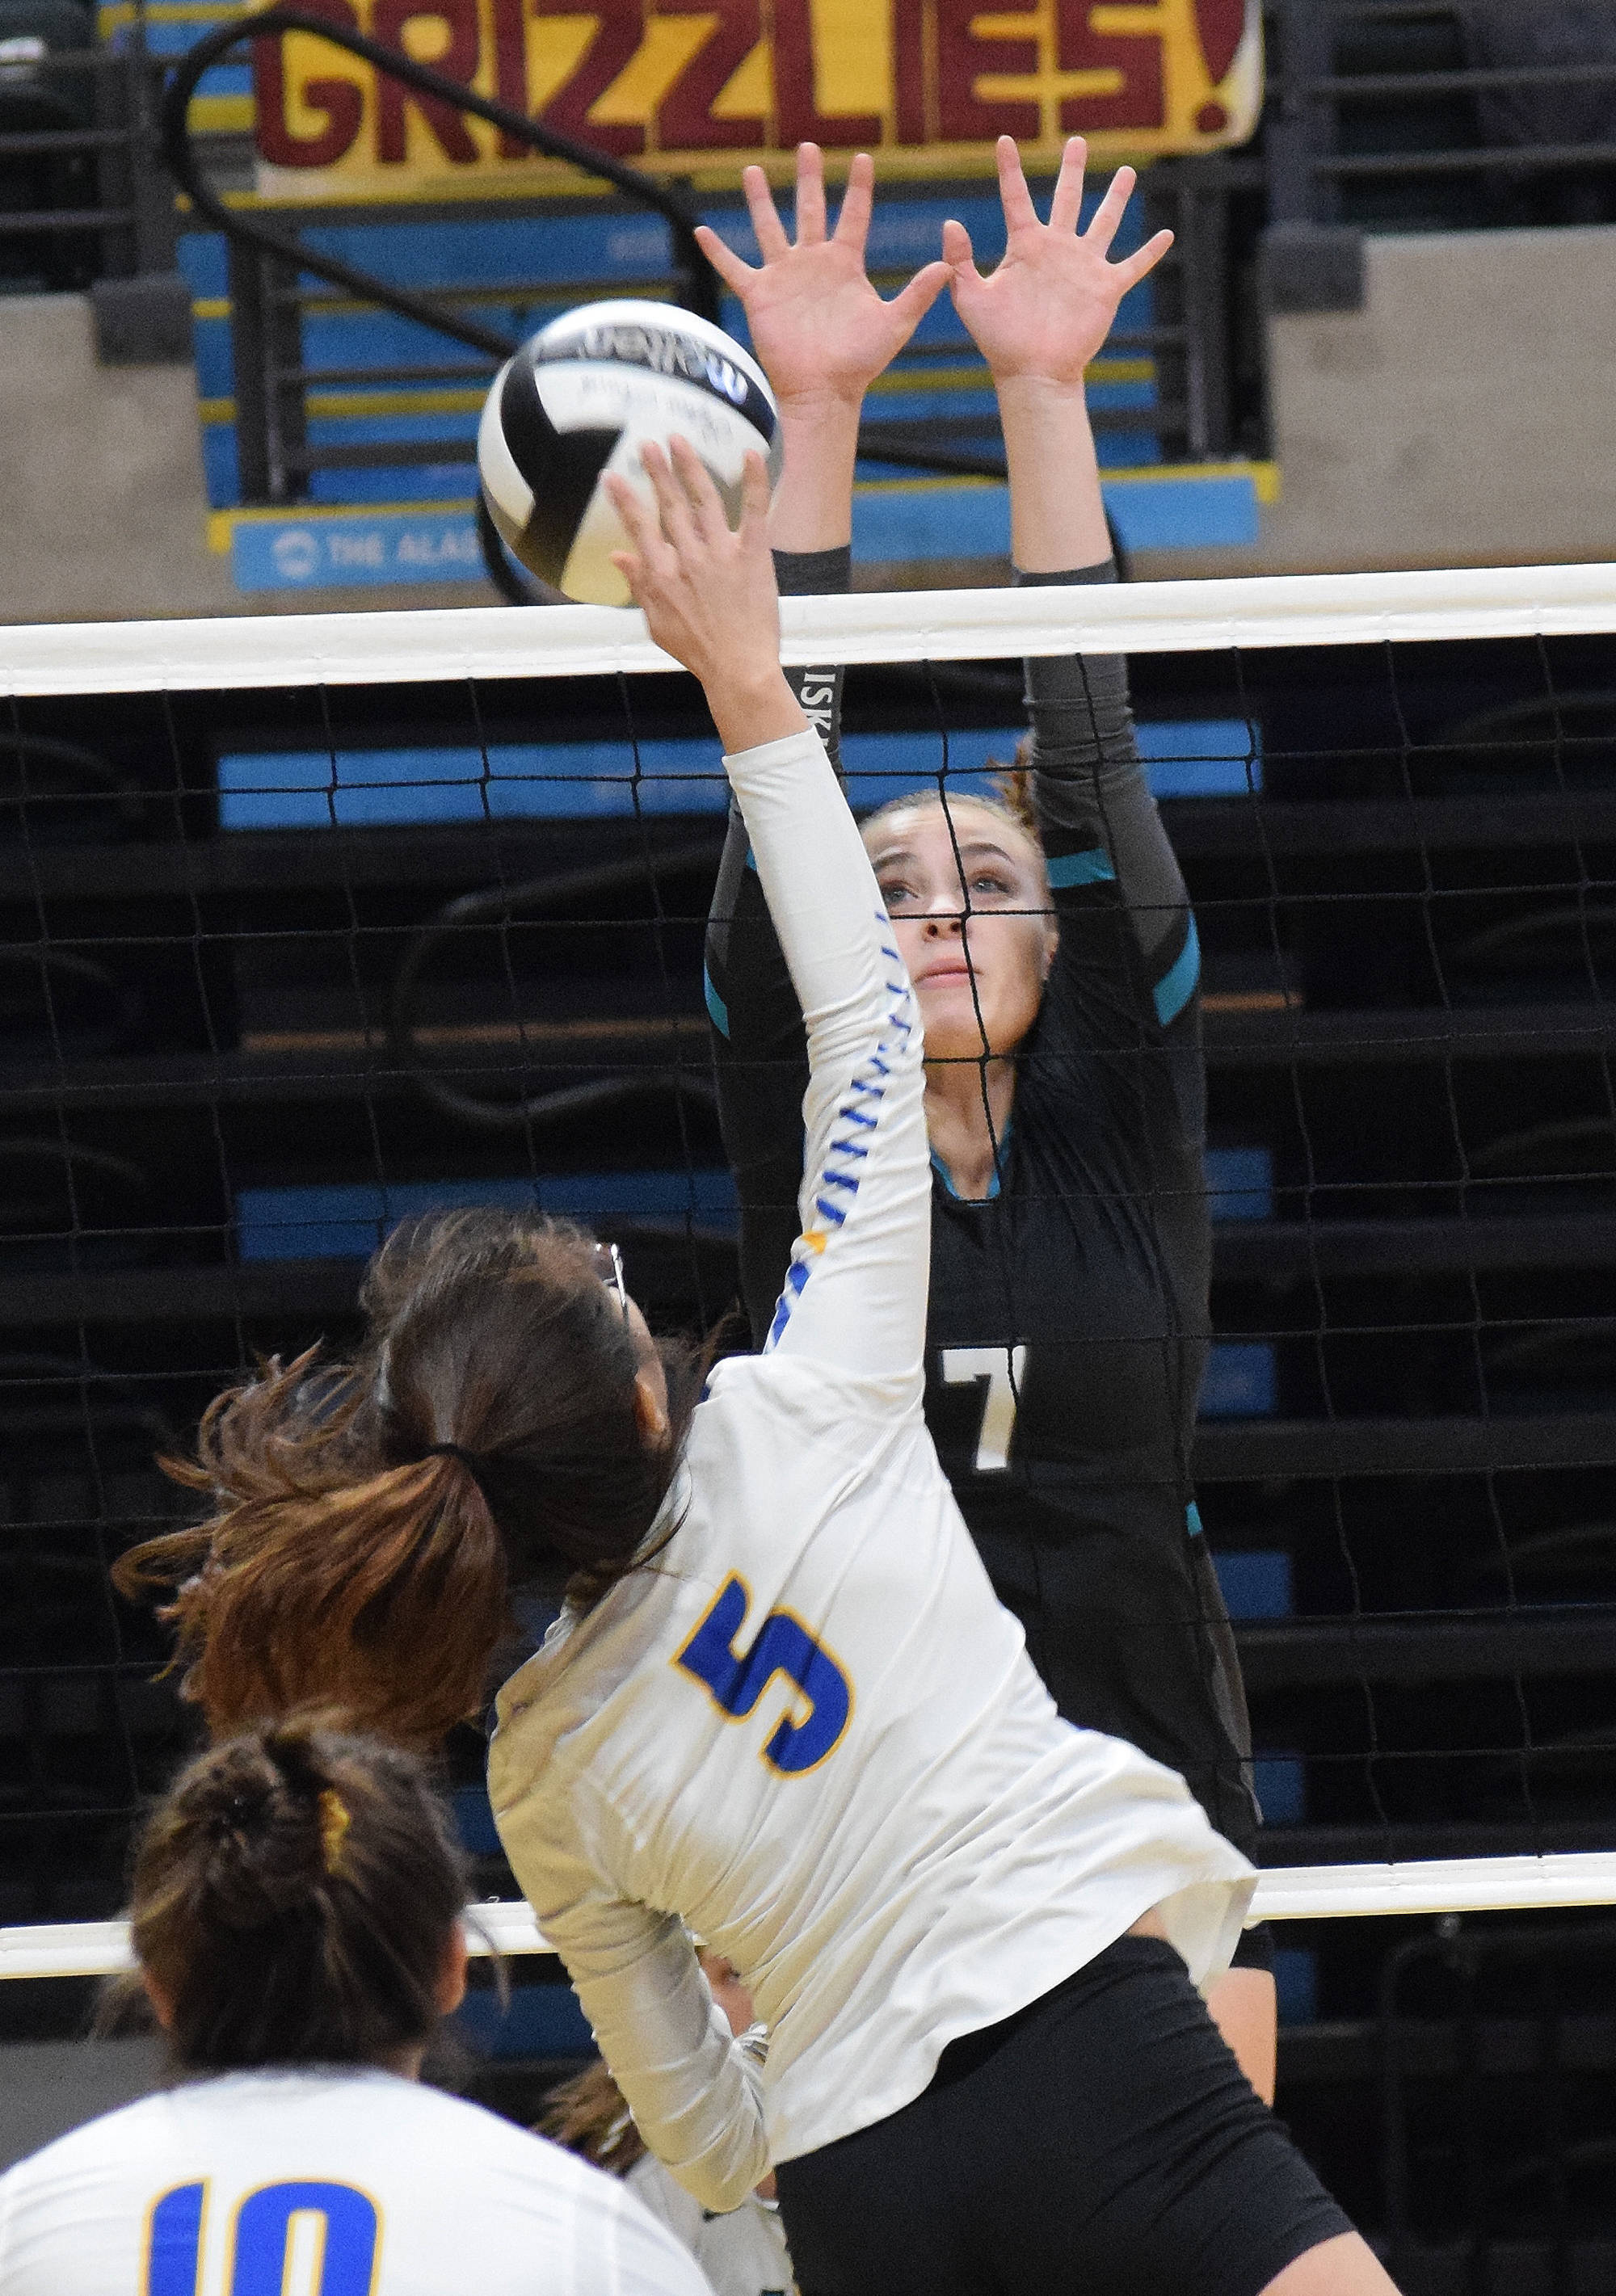 Nikiski’s Bethany Carstens blocks a shot by Barrow’s Jillian Chrestman-Adams (5) Thursday at the Class 3A state volleyball tournament at the Alaska Airlines Center. (Photo by Joey Klecka/Peninsula Clarion)